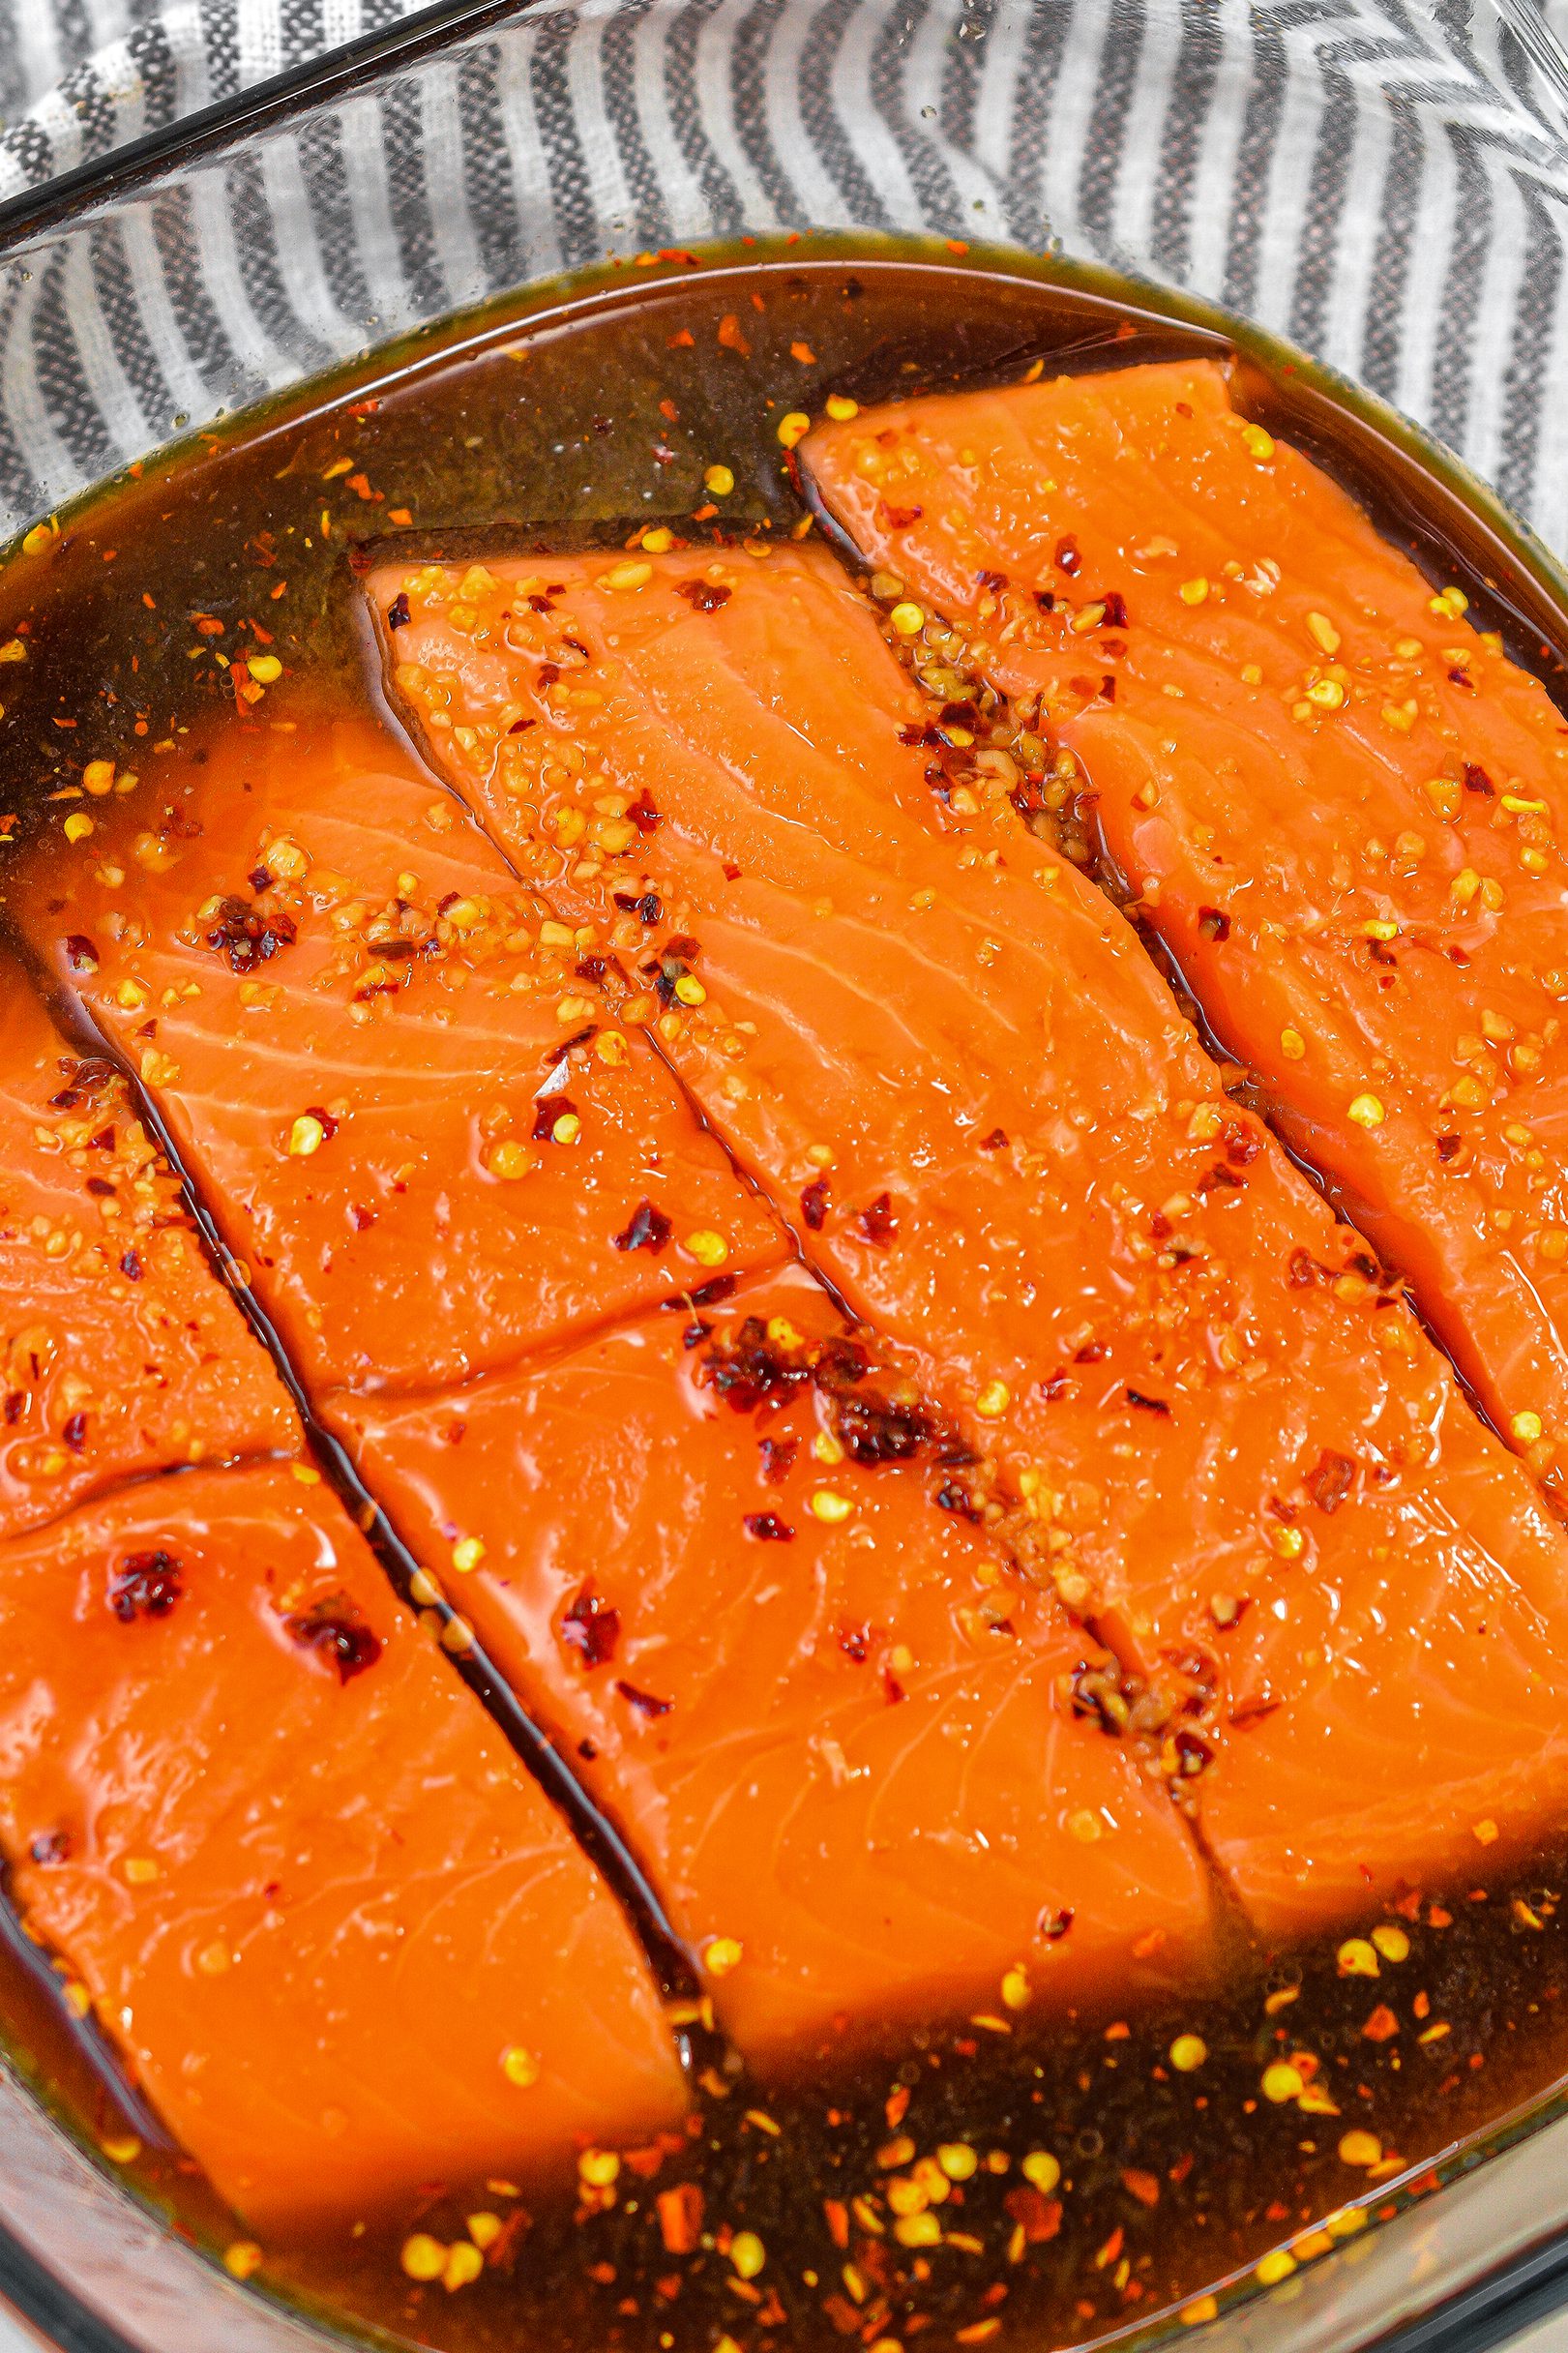 Pour the sauce mixture over the salmon and bake for 12-15 minutes.